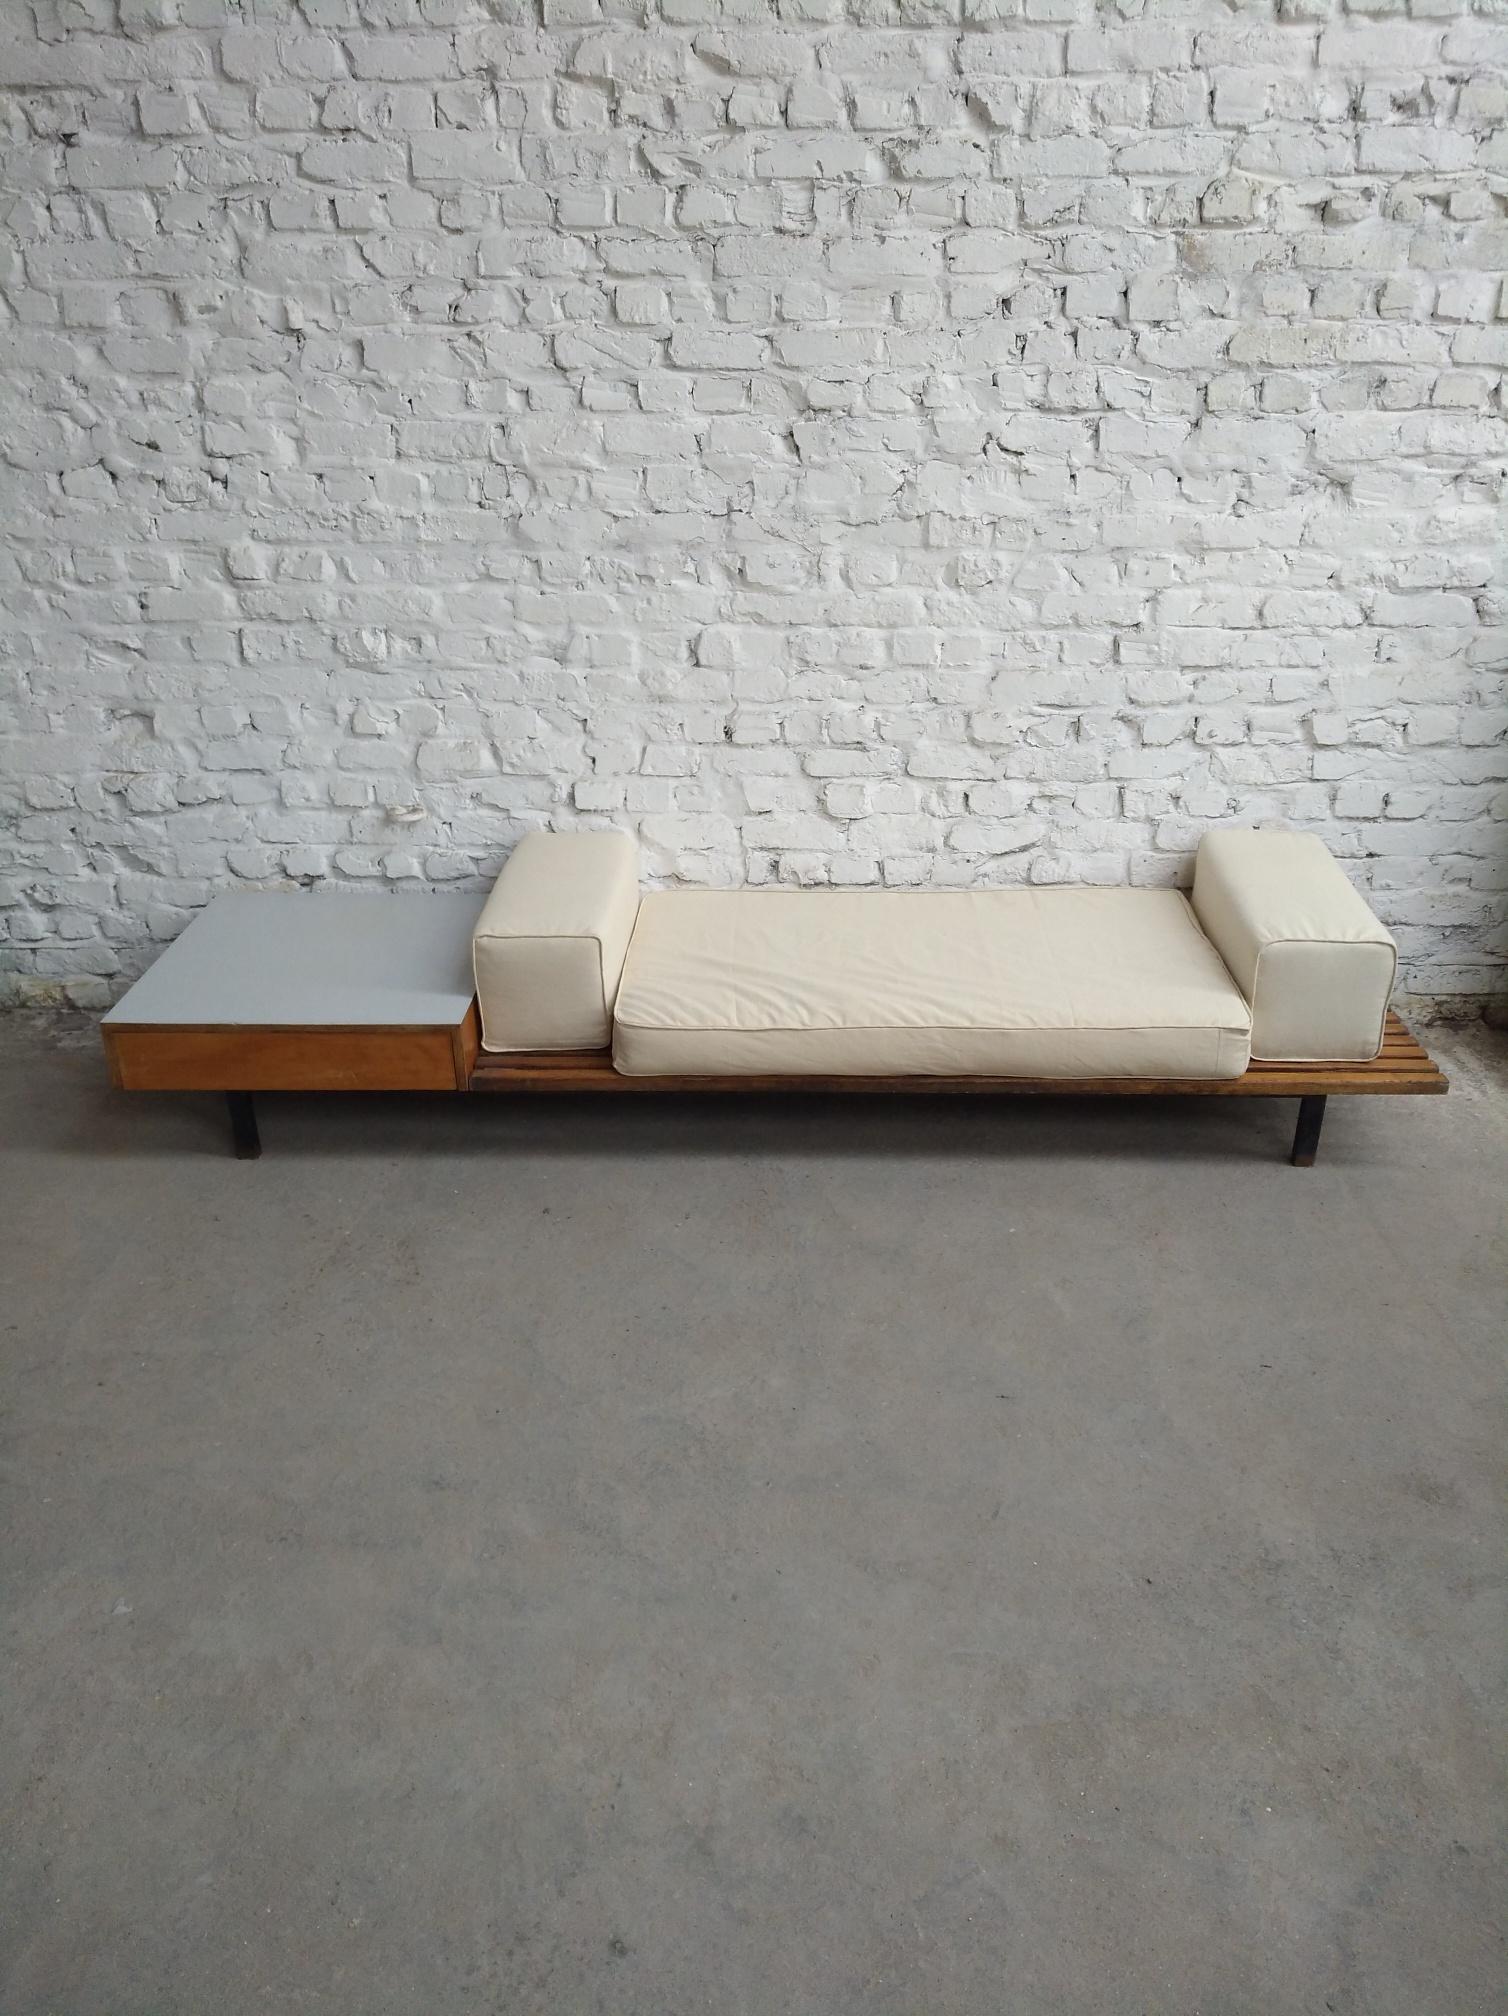 Charlotte Perriand Cansado bench daybed Steph Simon France 1959 For Sale 8